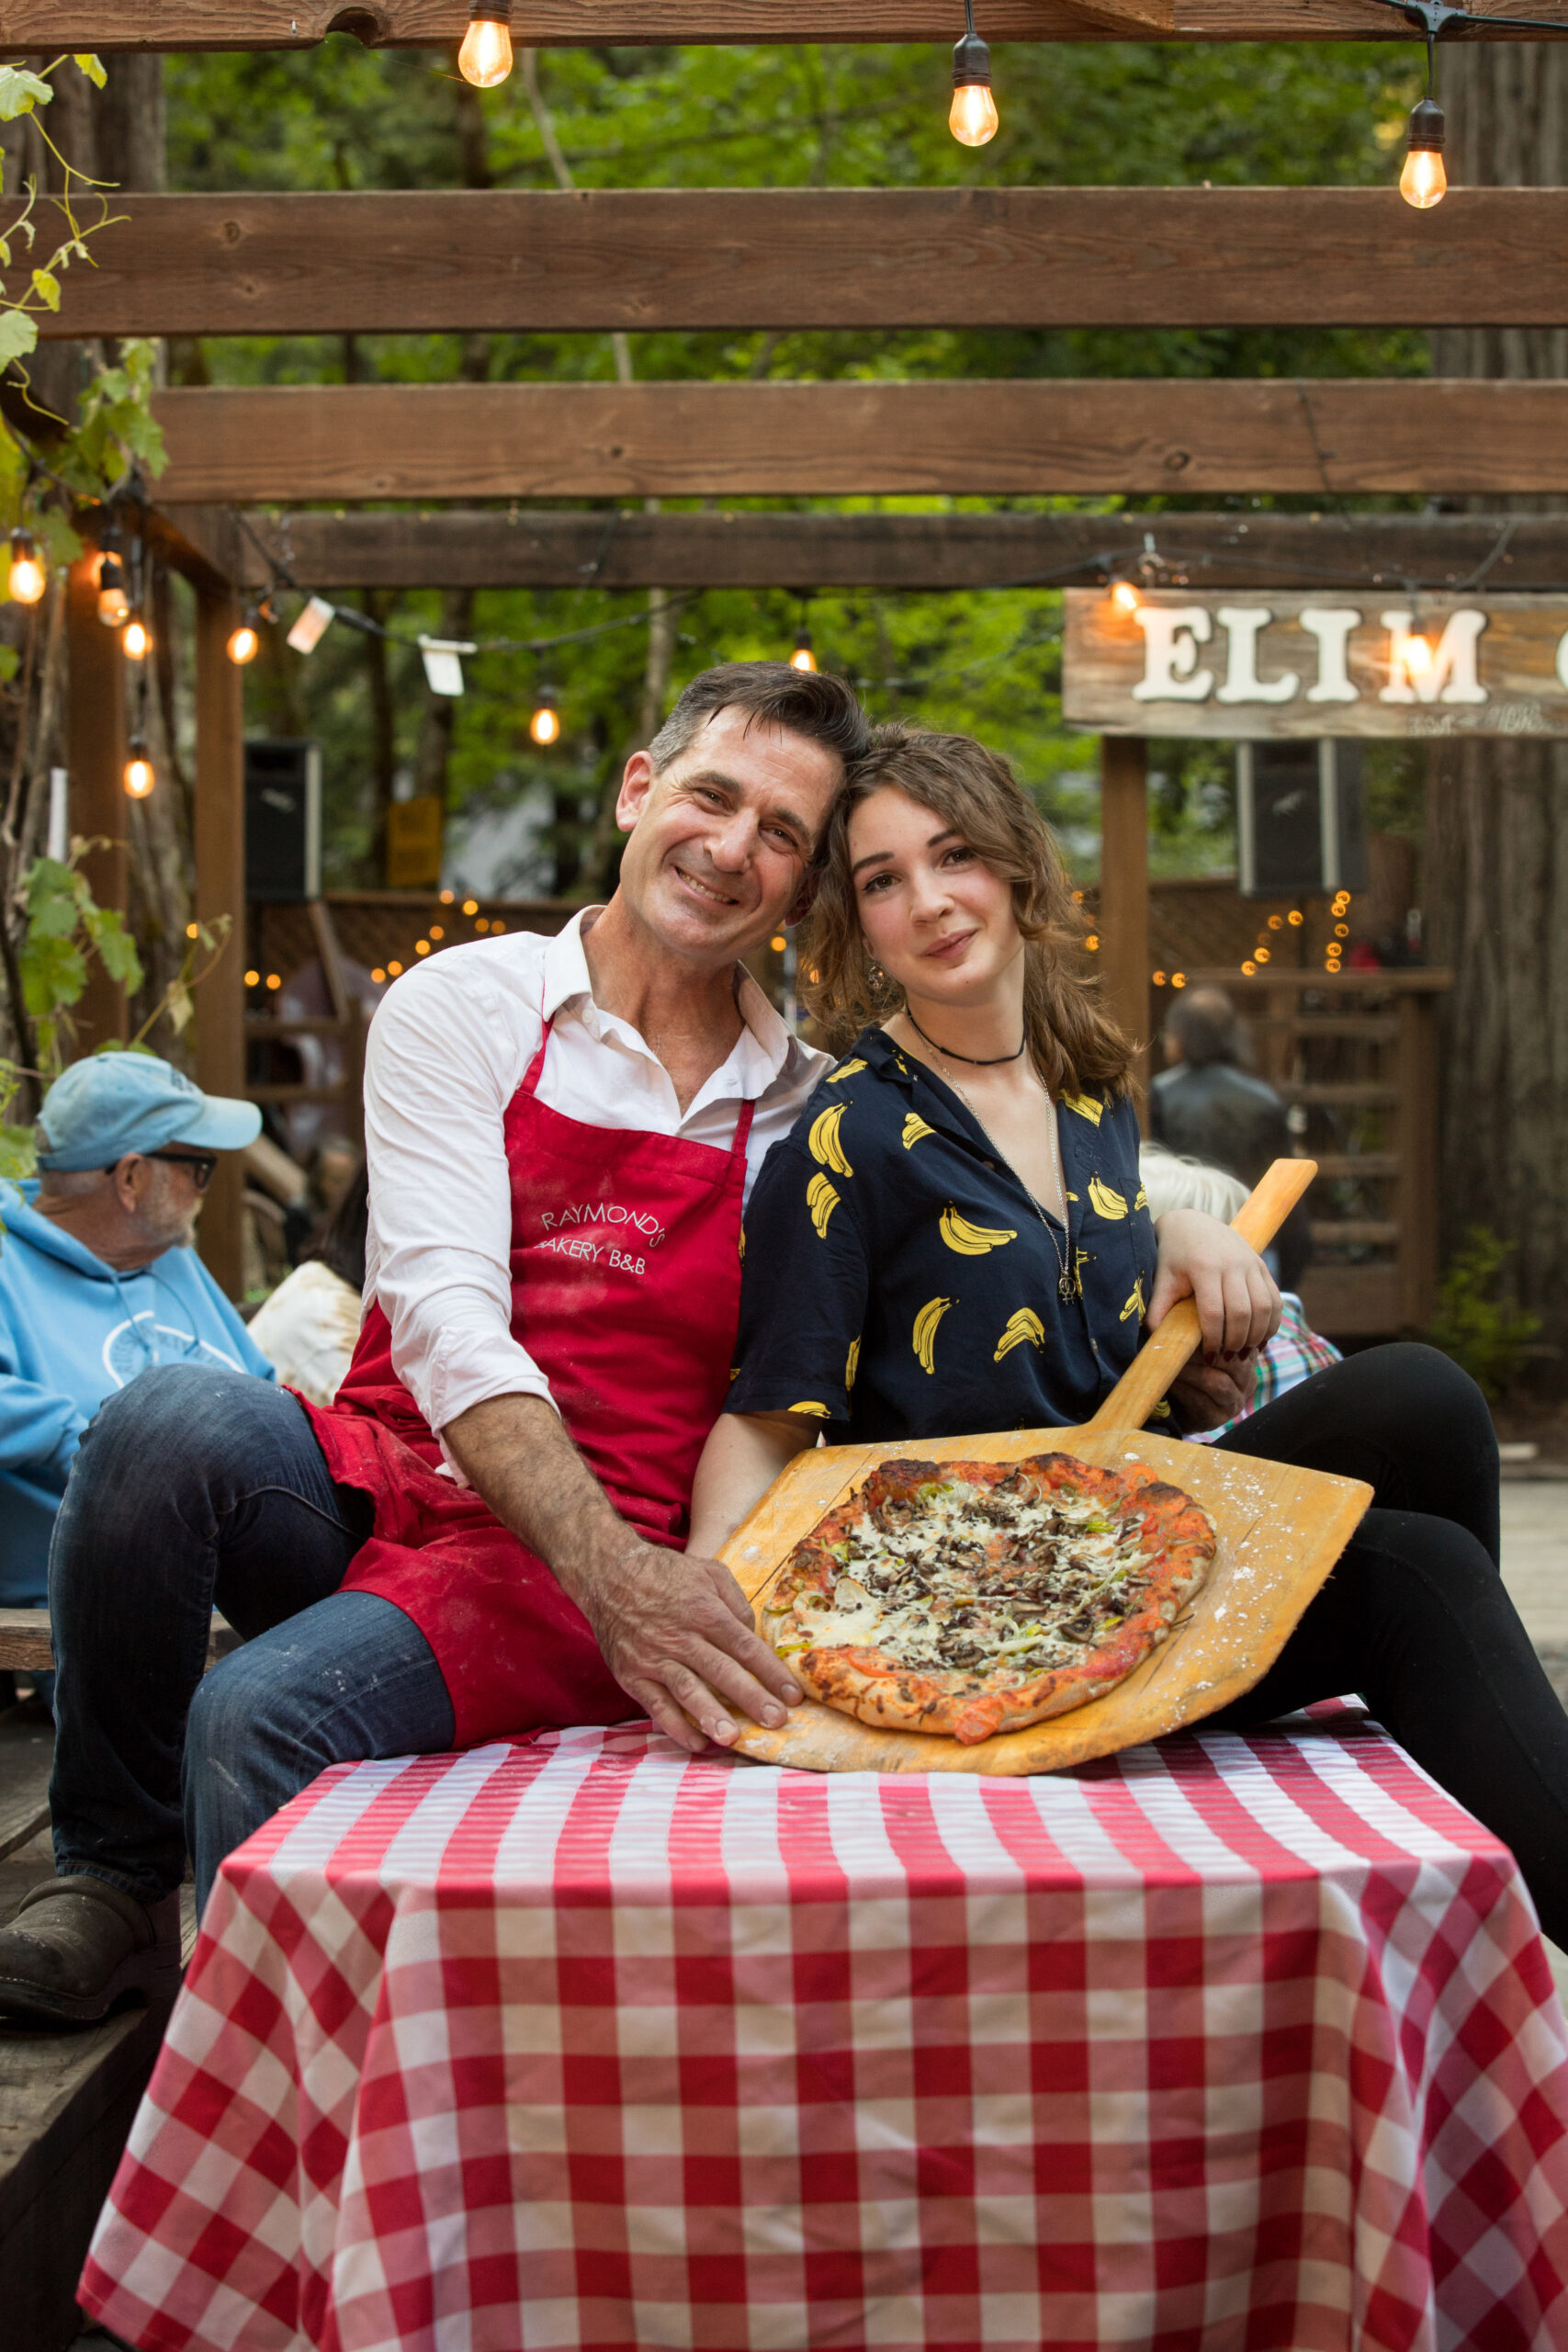 Owner, Mark Weiss, and his daughter who works at the bakery, Ella Weiss, 17, hold one of their pizzas, during community pizza night with live music at Raymond's Bakery, in Cazadero, Calif., on Friday, May 13, 2022. (Photo by Darryl Bush / For The Press Democrat)